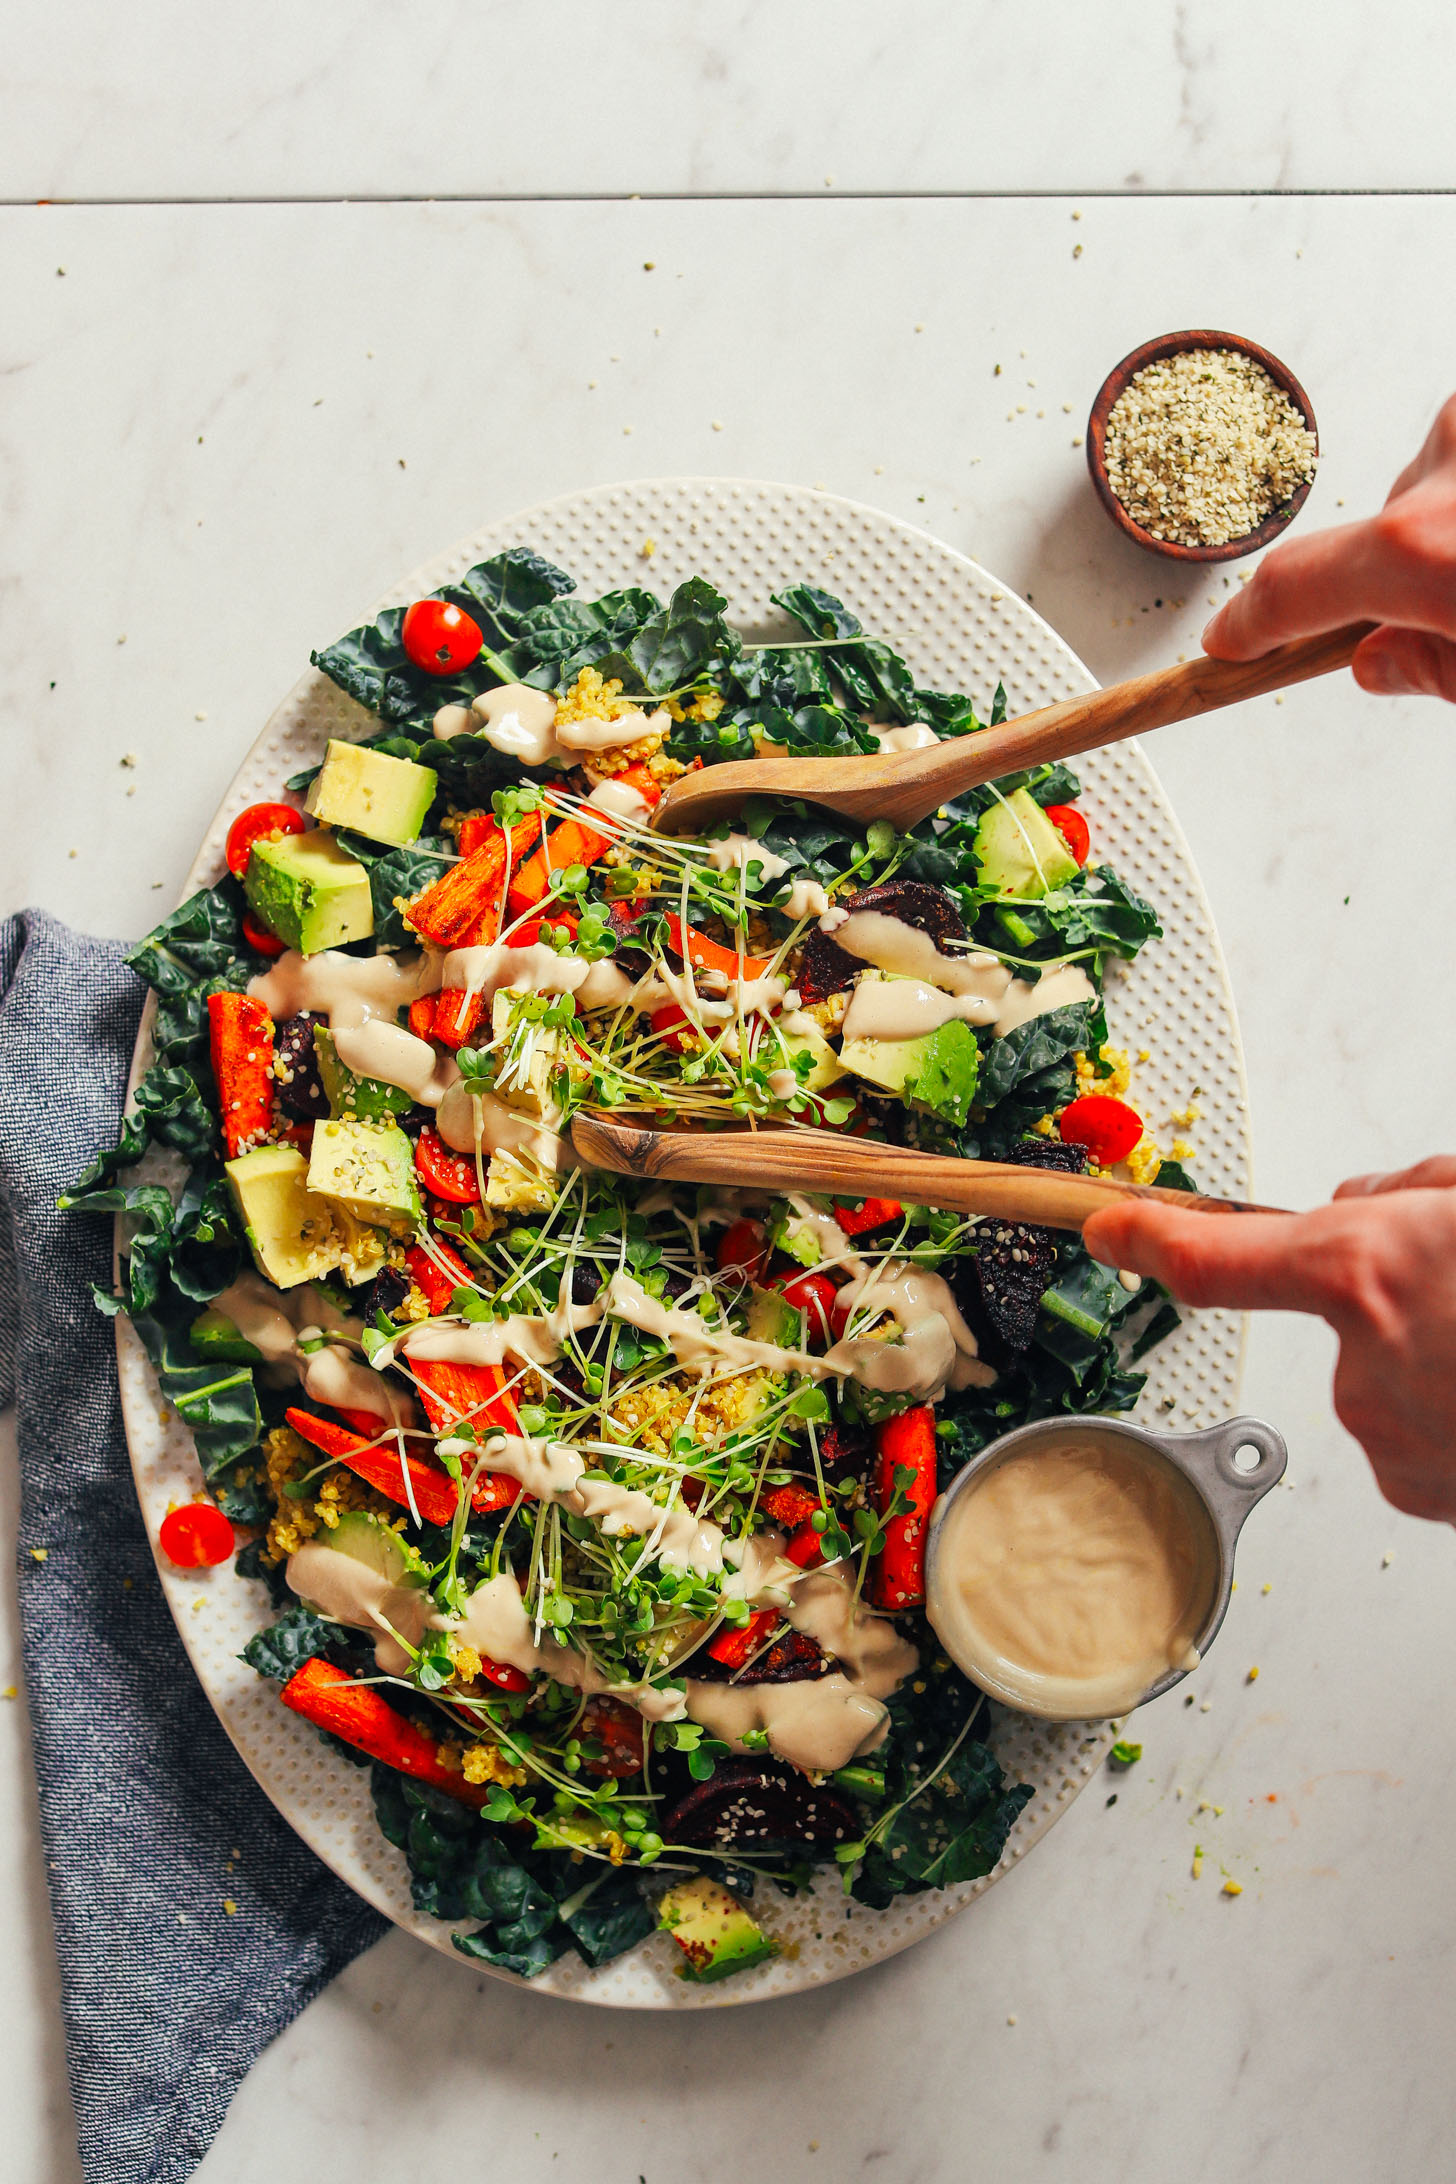 HEALTHY Loaded Kale Salad in just 30 minutes! Roasted and fresh veggies, sprouts, quinoa, and tahini dressing! #dinner #vegan #glutenfree #salad #healthy #minimalistbaker #recipe